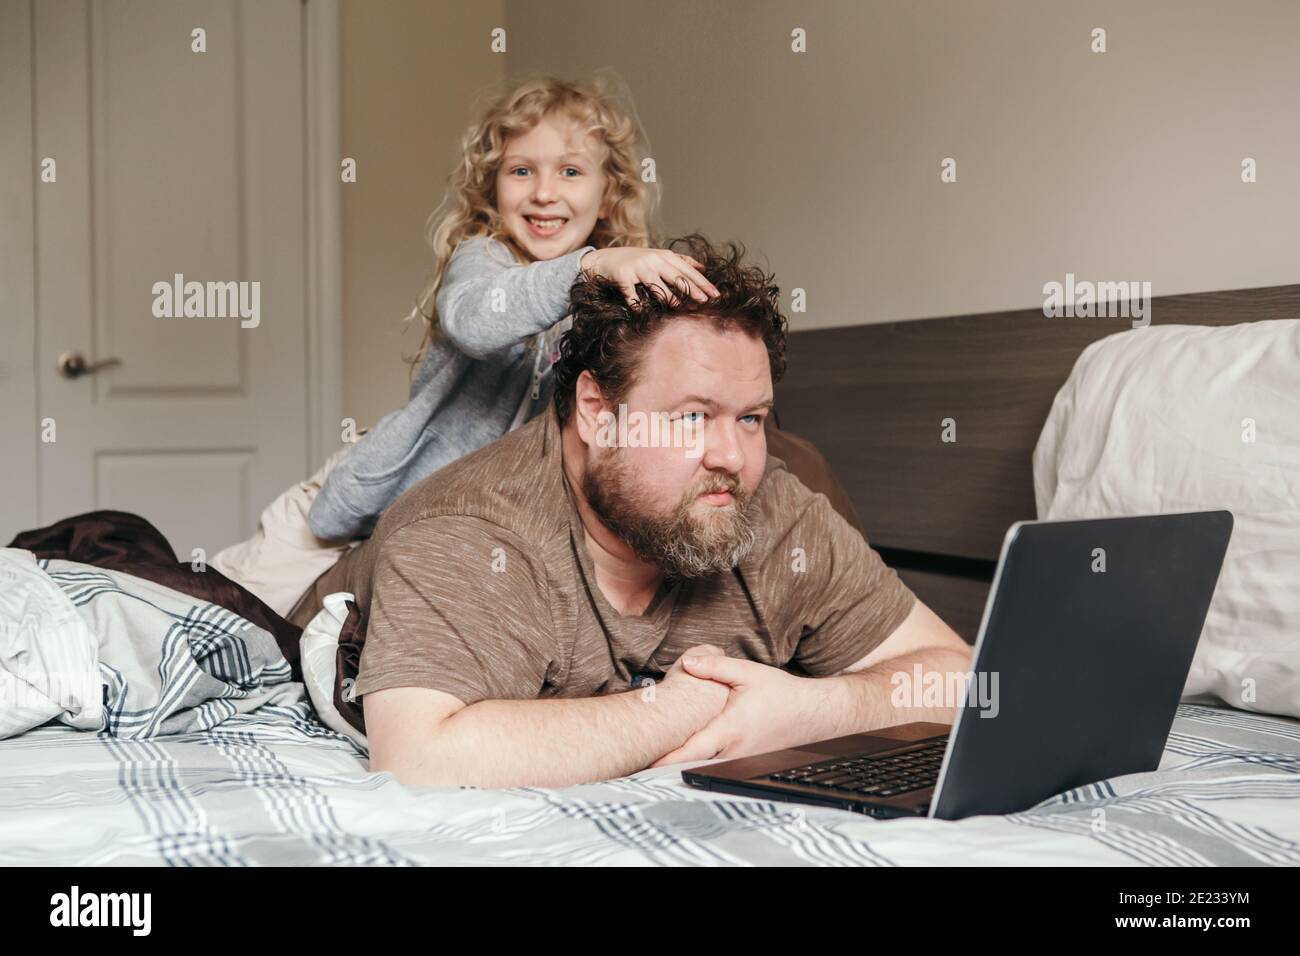 Work from home with kids children. Father working on laptop in ...